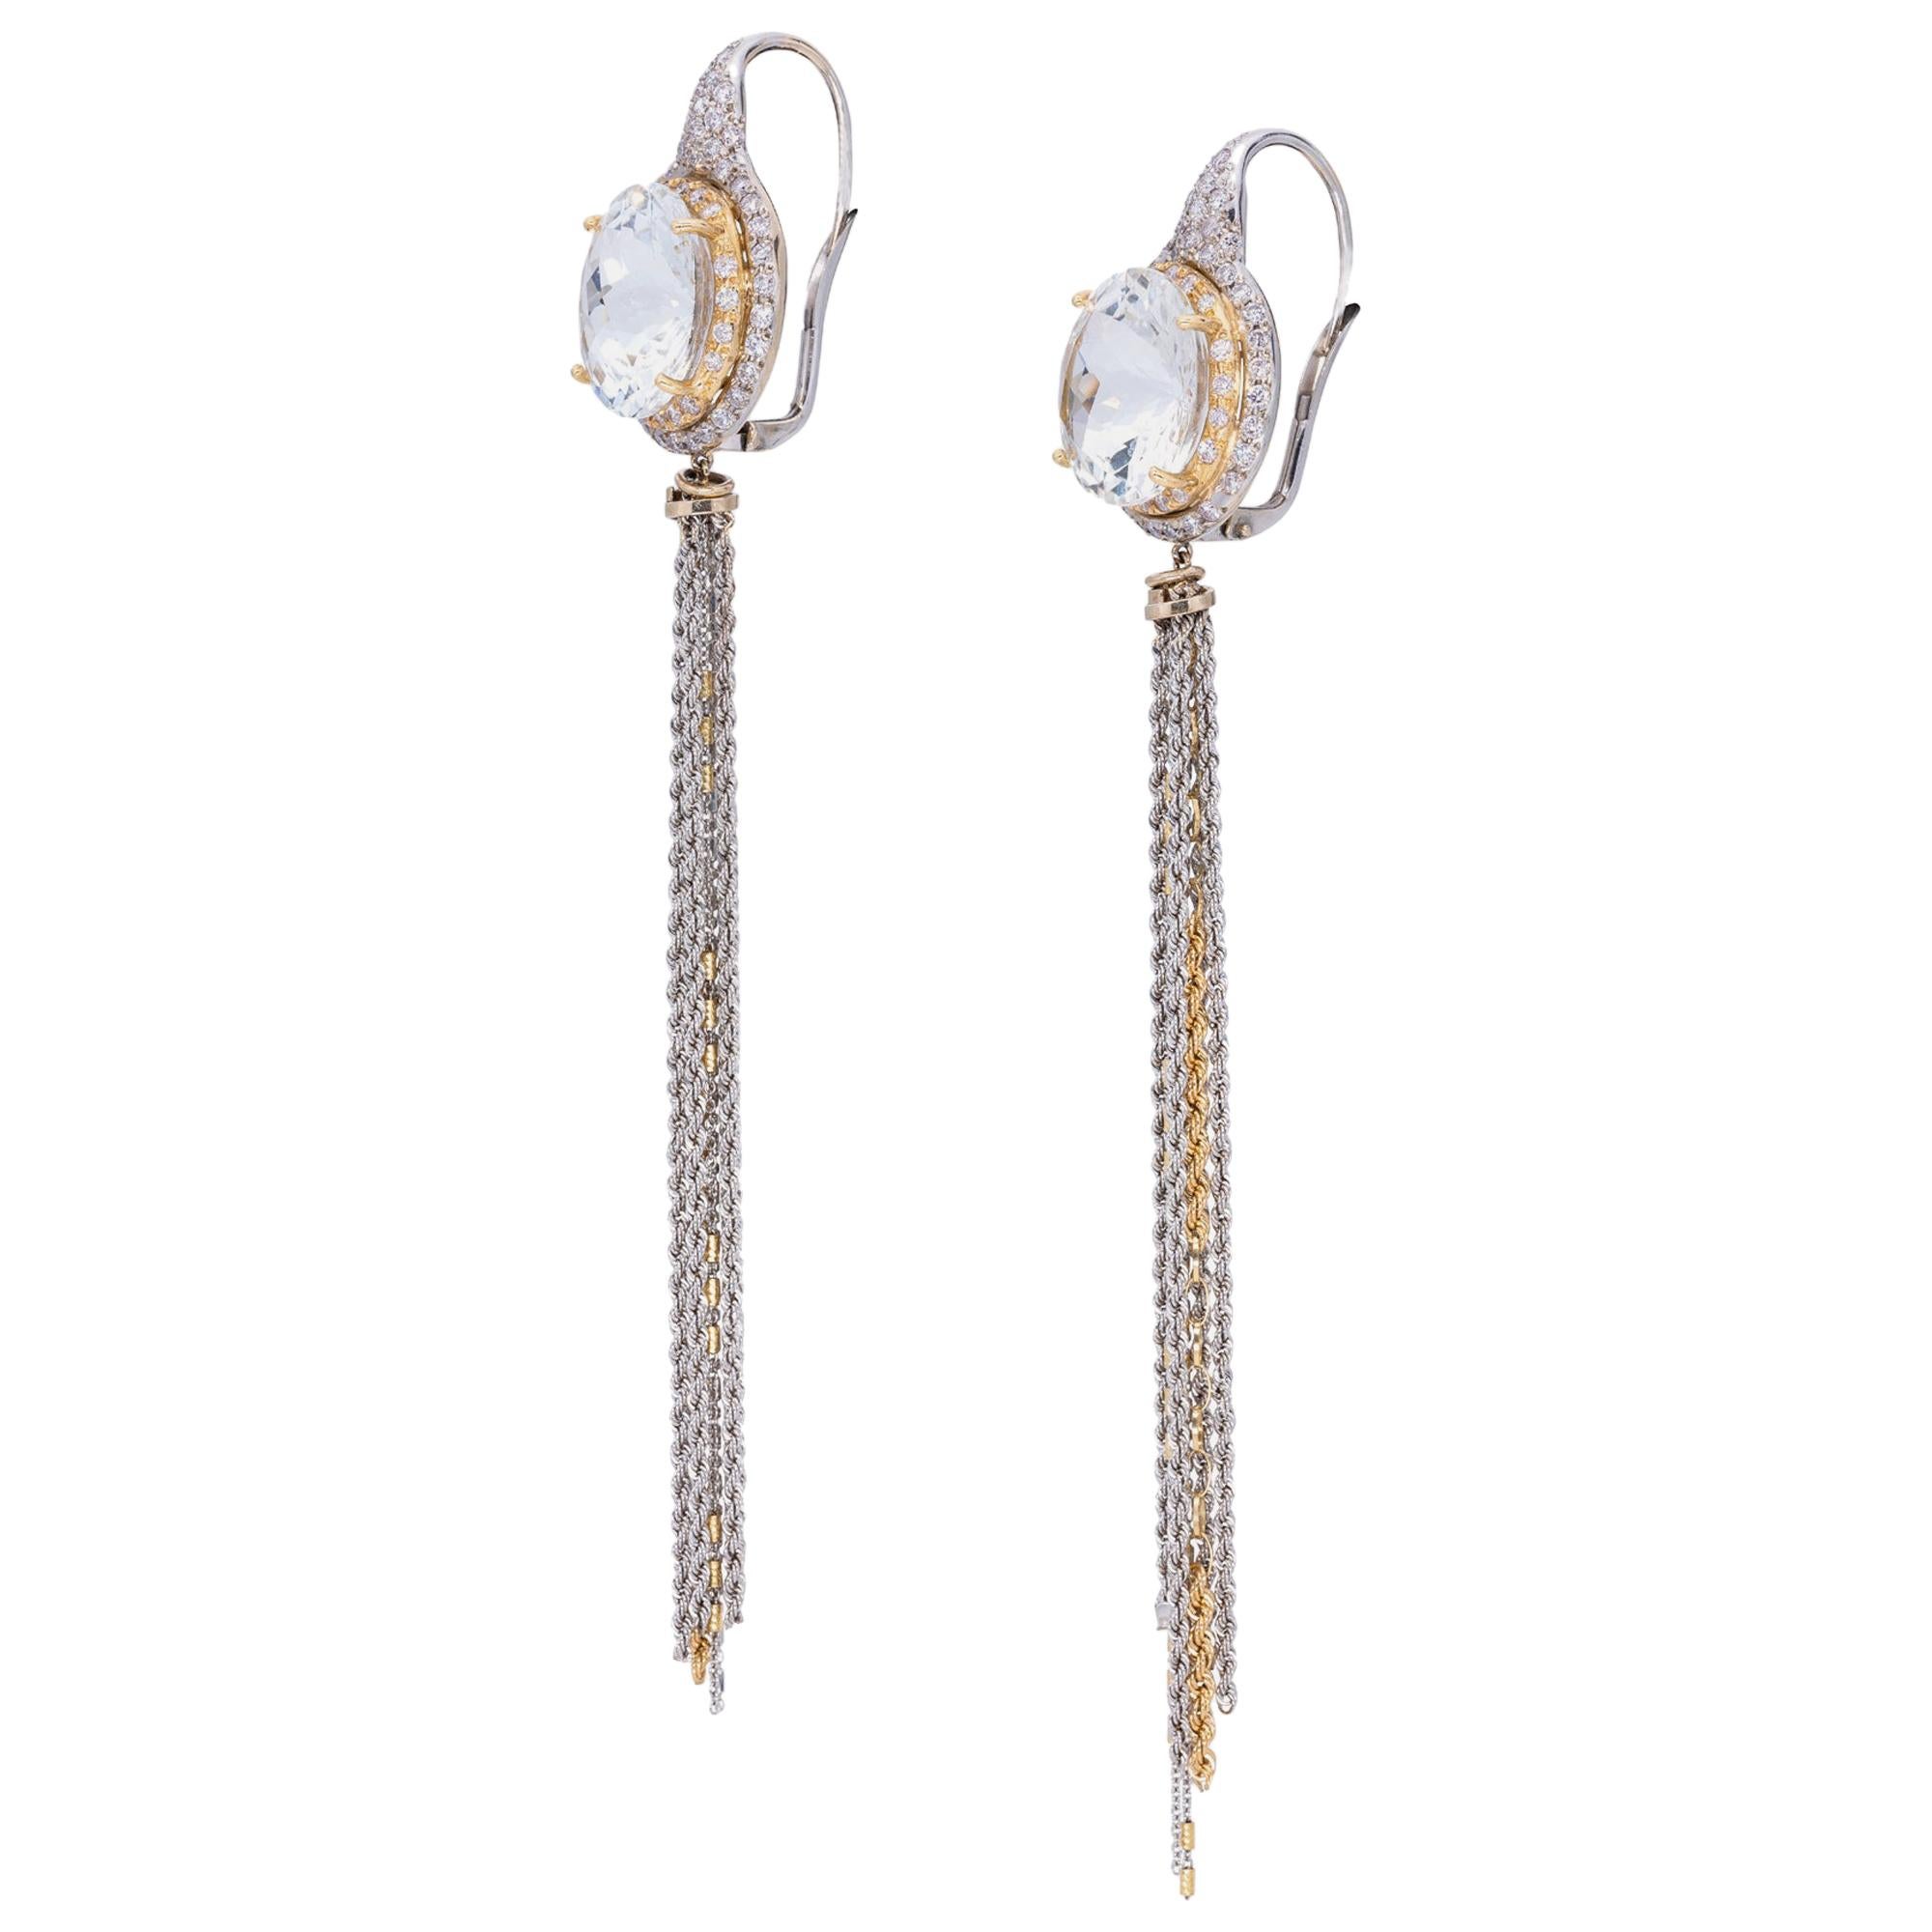 Central White Topazes and Diamonds Earrings in White and Yellow Gold